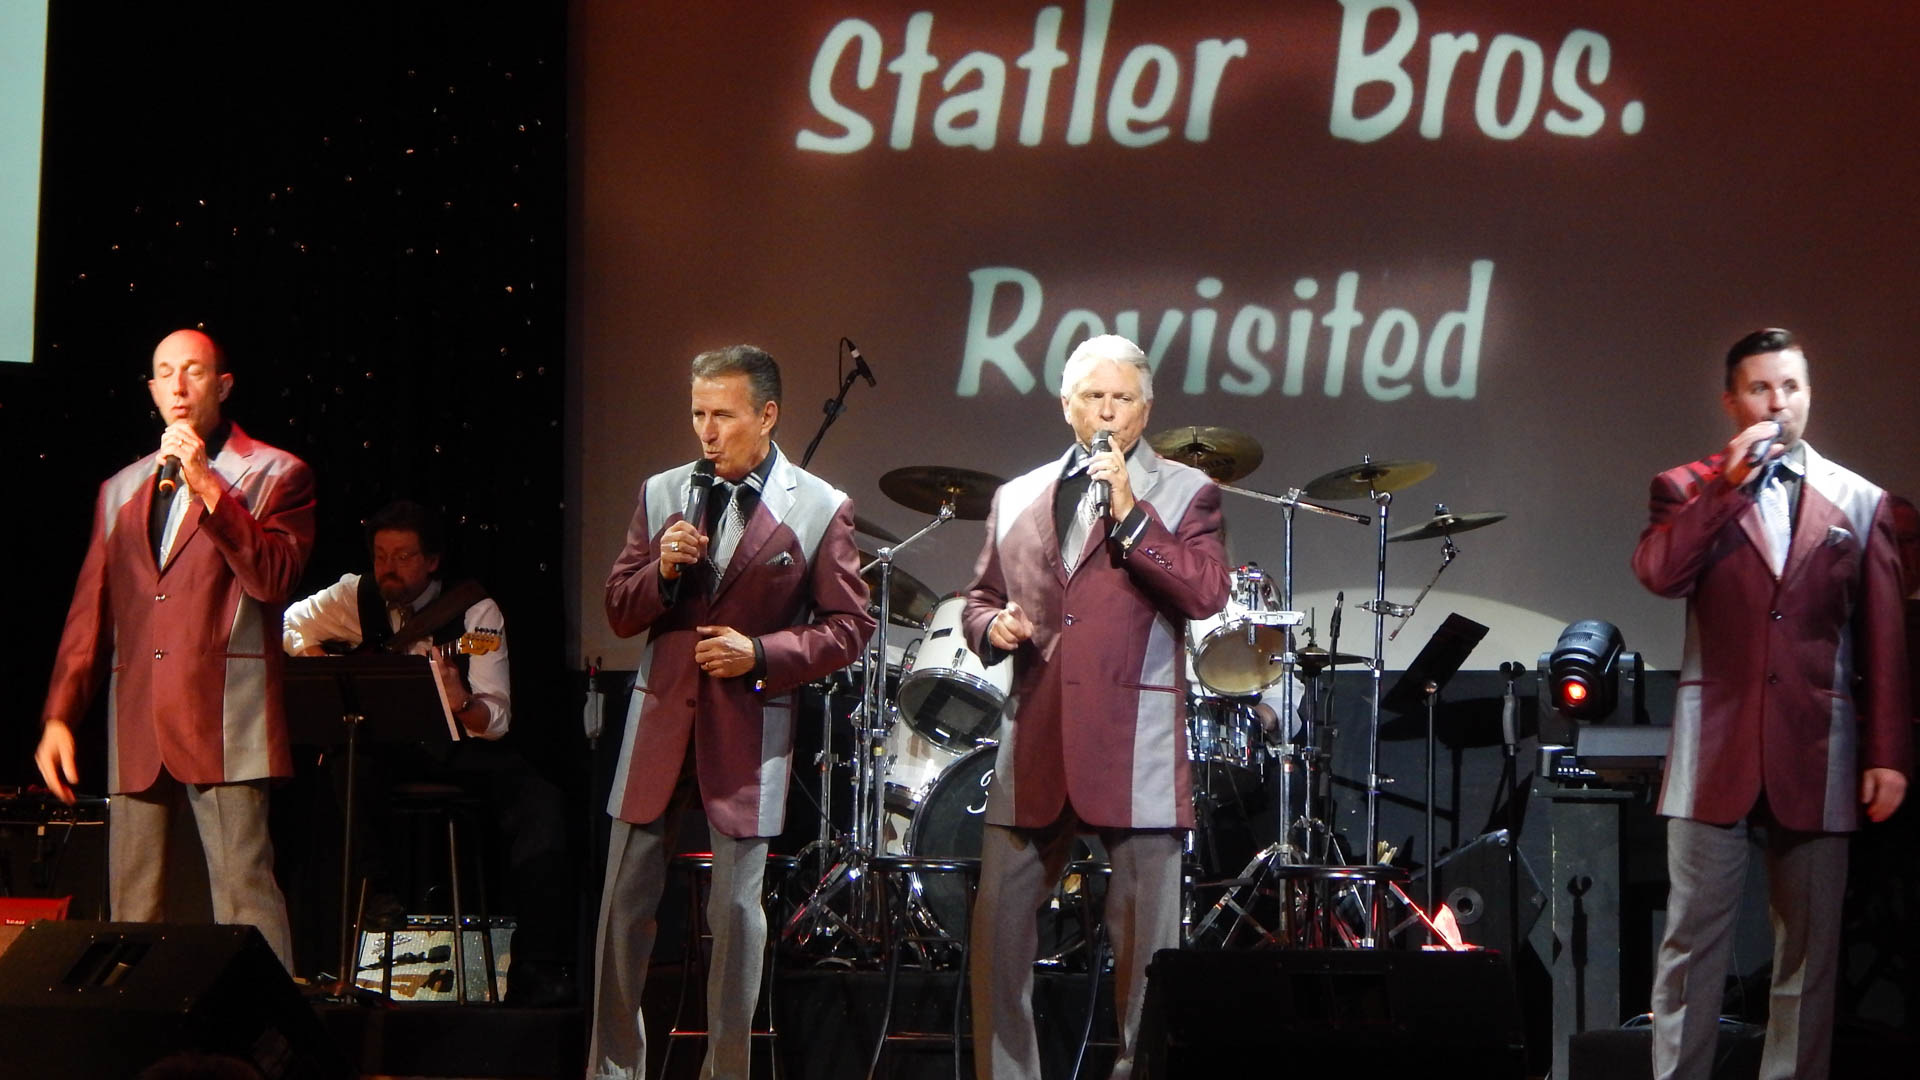 190505 Statler Brothers Revisited Gro - Hear those Statler Brothers hit songs at the God and Country Theatre